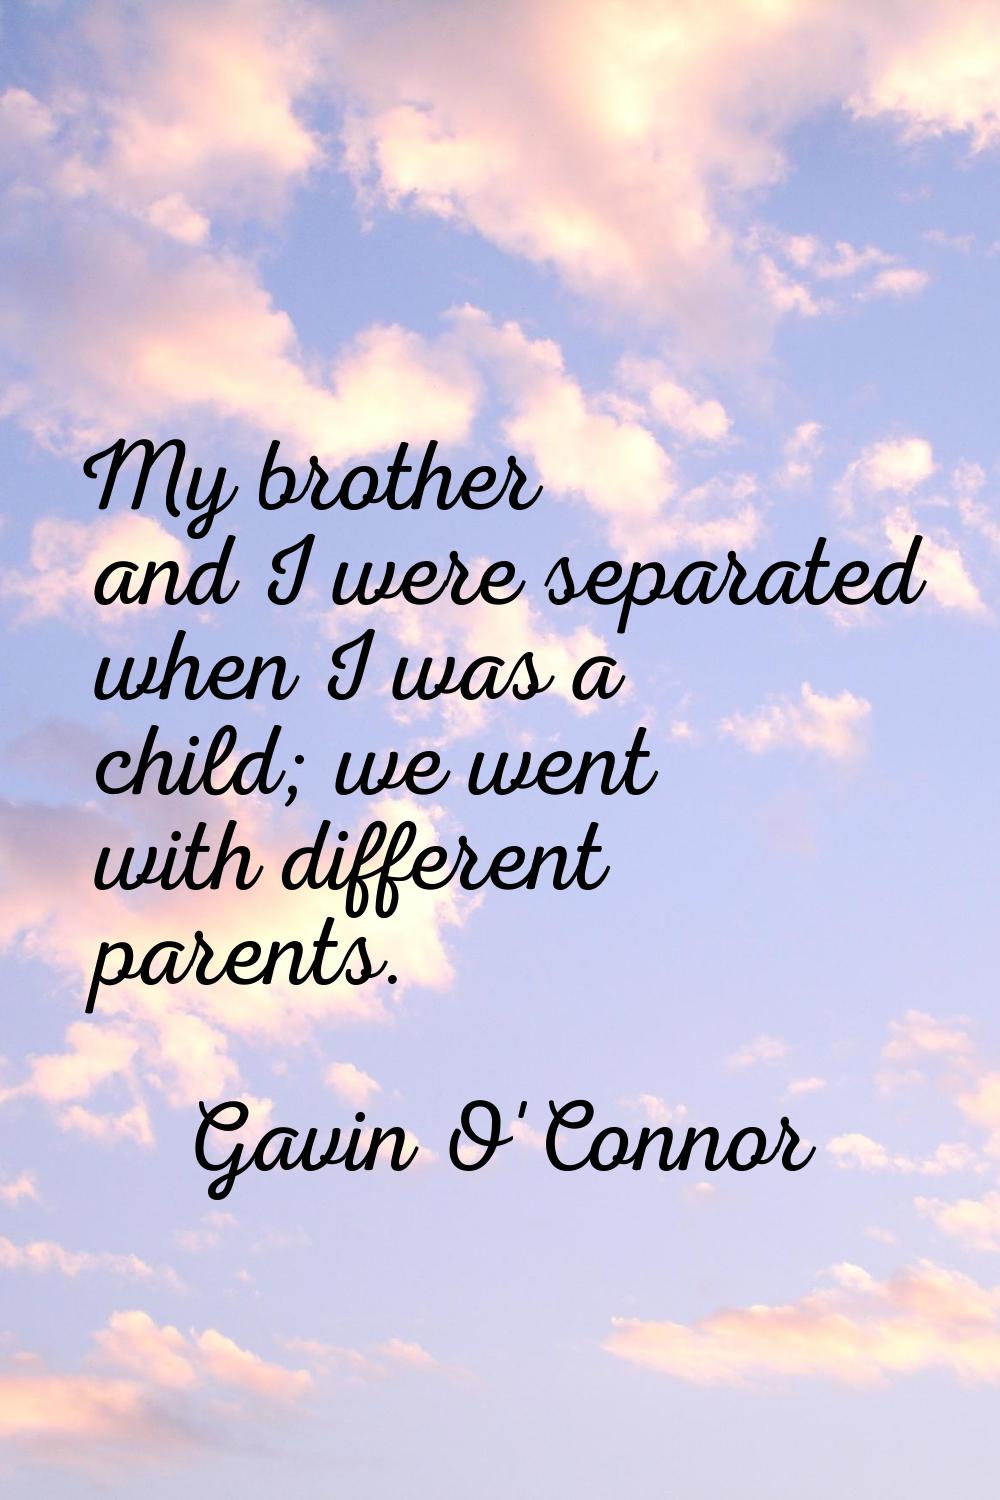 My brother and I were separated when I was a child; we went with different parents.